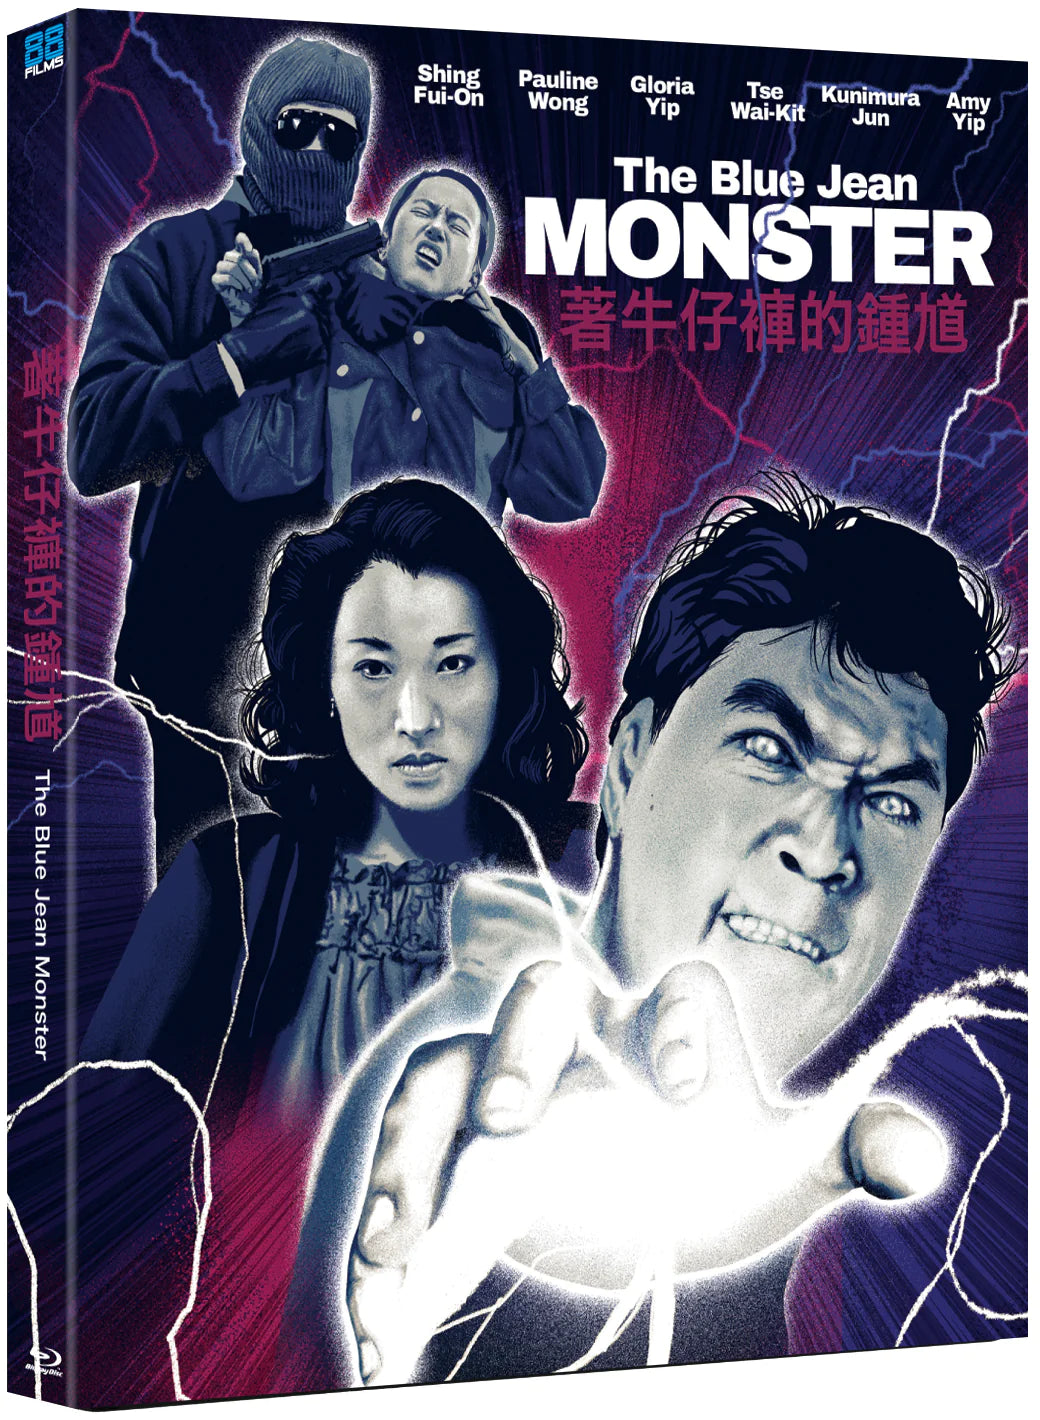 The Blue Jean Monster [Blu-ray] [UK]